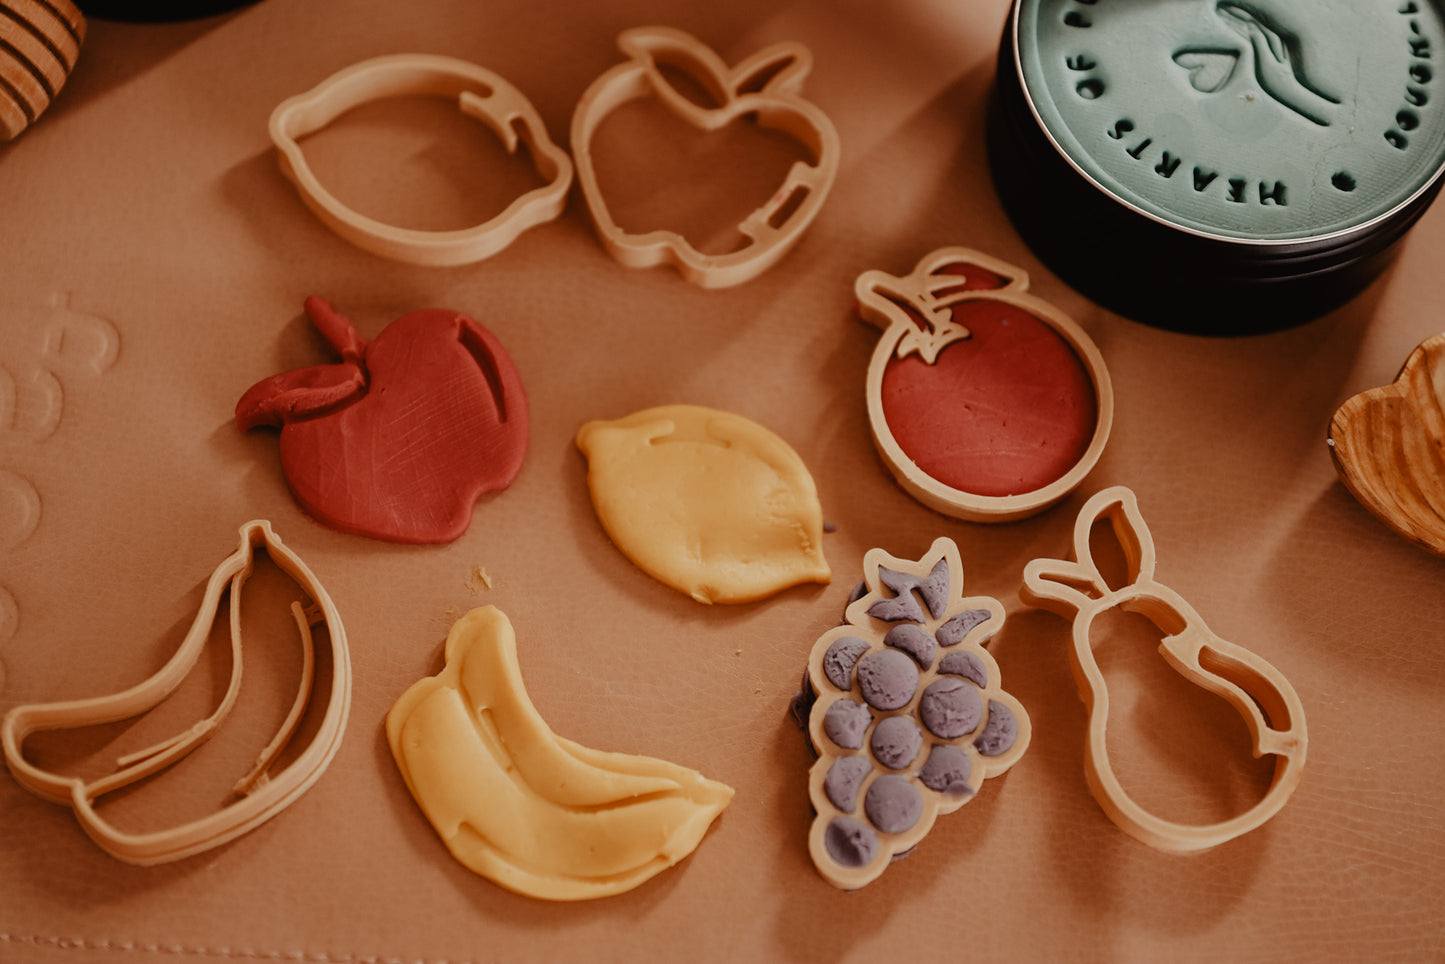 Kinfolk Pantry set of 6 mini fruit eco cutters being used to cut shapes from playdough in orange, yellow and purple - great for sensory learning and play. Cutter set includes bananas, orange, apple, lemon, grapes and pear.